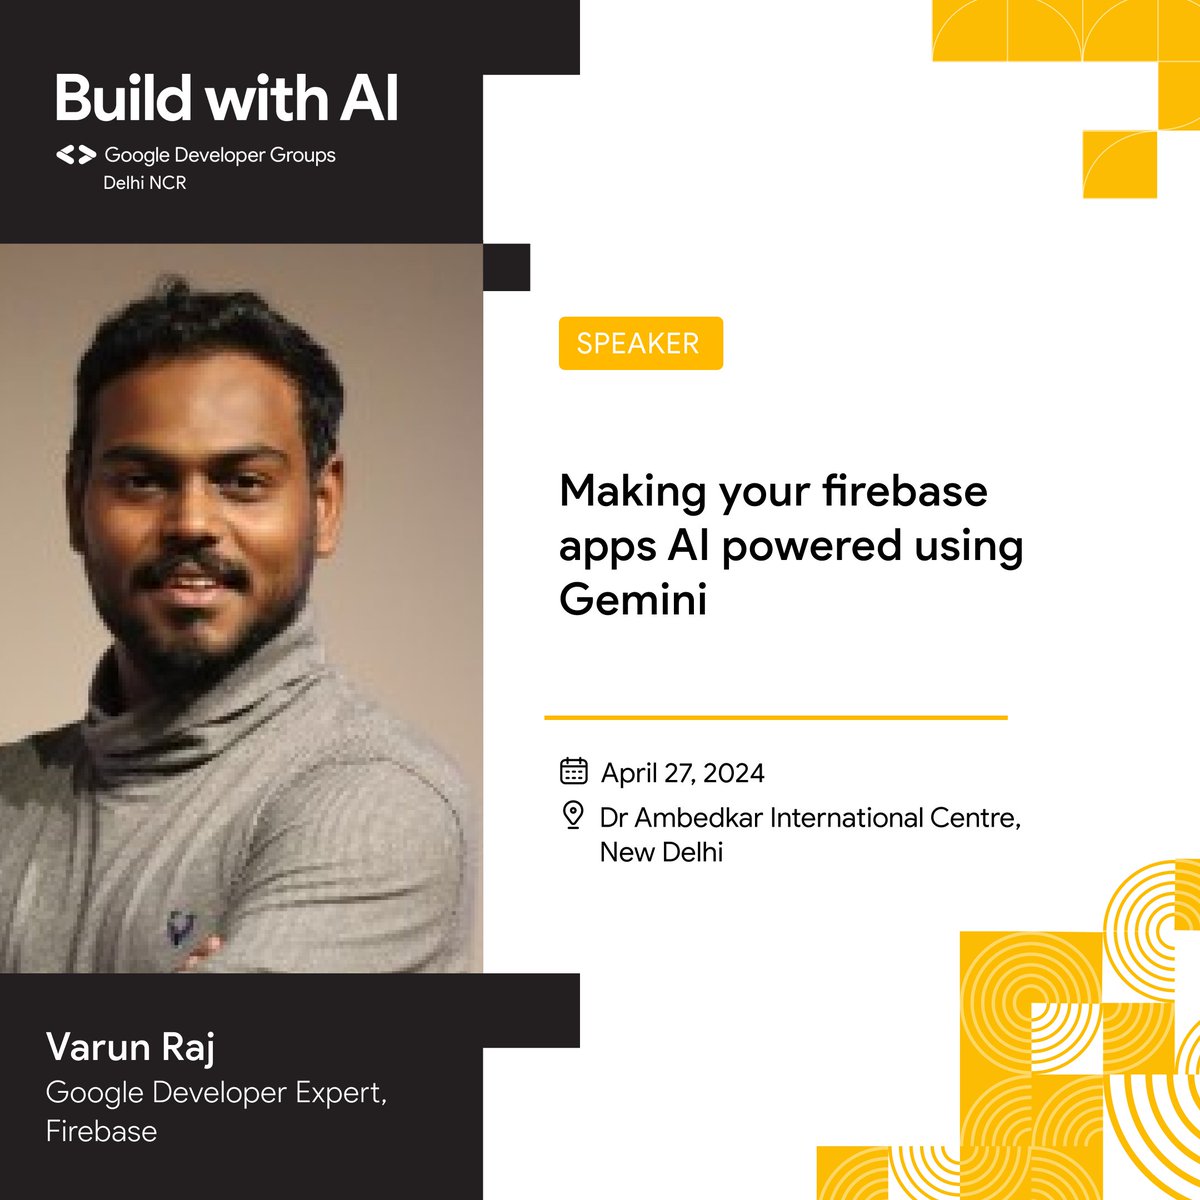 Firebase fam, level up! 🔥 Varun shows you how to turn apps into AI-fueled machines using Gemini. Elevate your dev flows to transcendent heights!